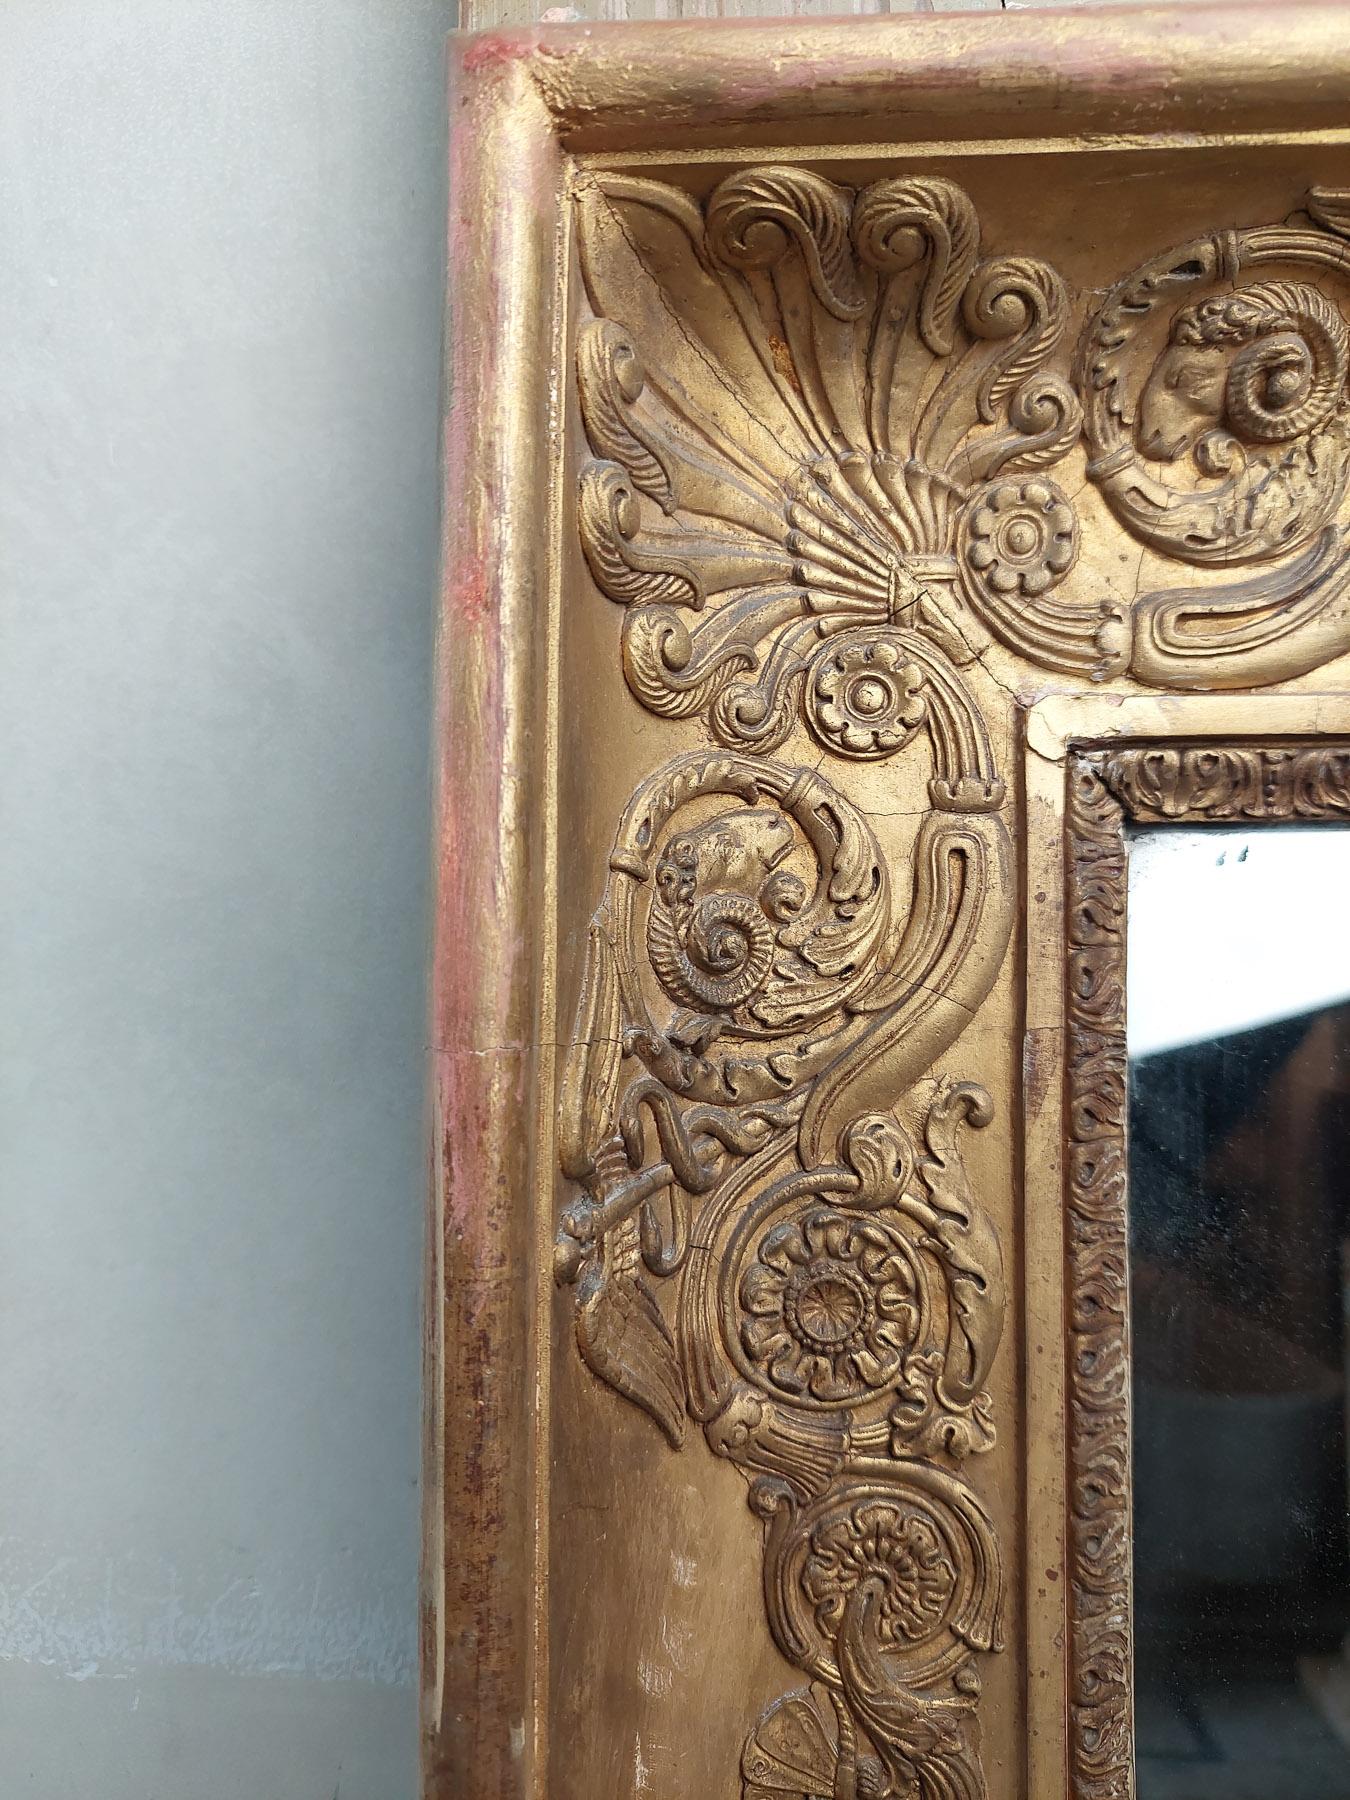 Antique Carved and Gilt Wood Empire Trumeau Mirror from ± 1800 - 1820 5